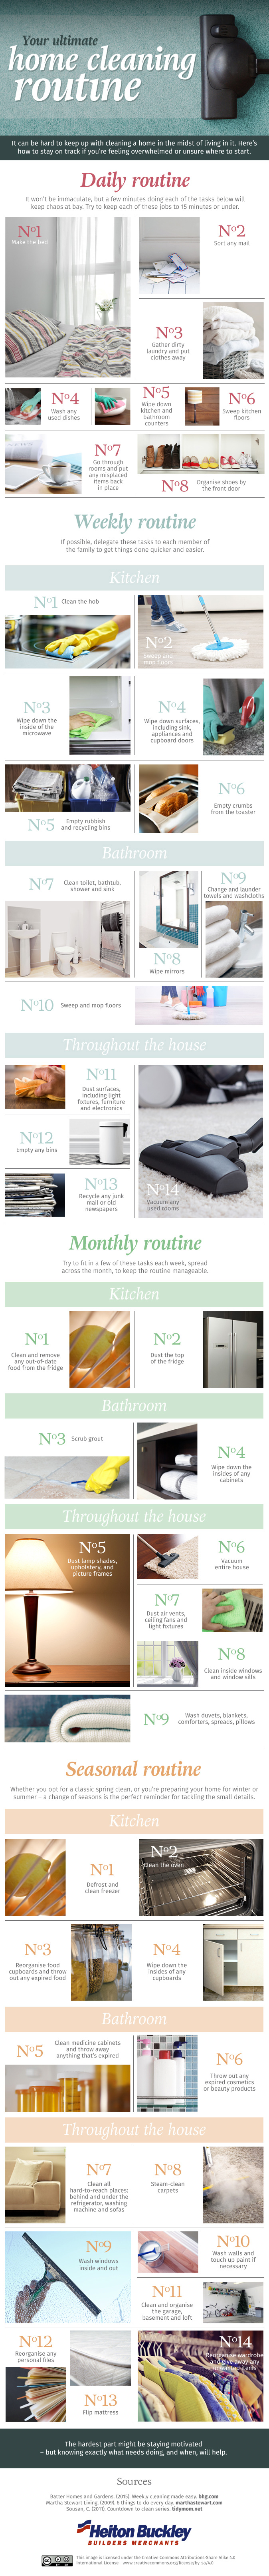 Your Ultimate Home Cleaning Routine